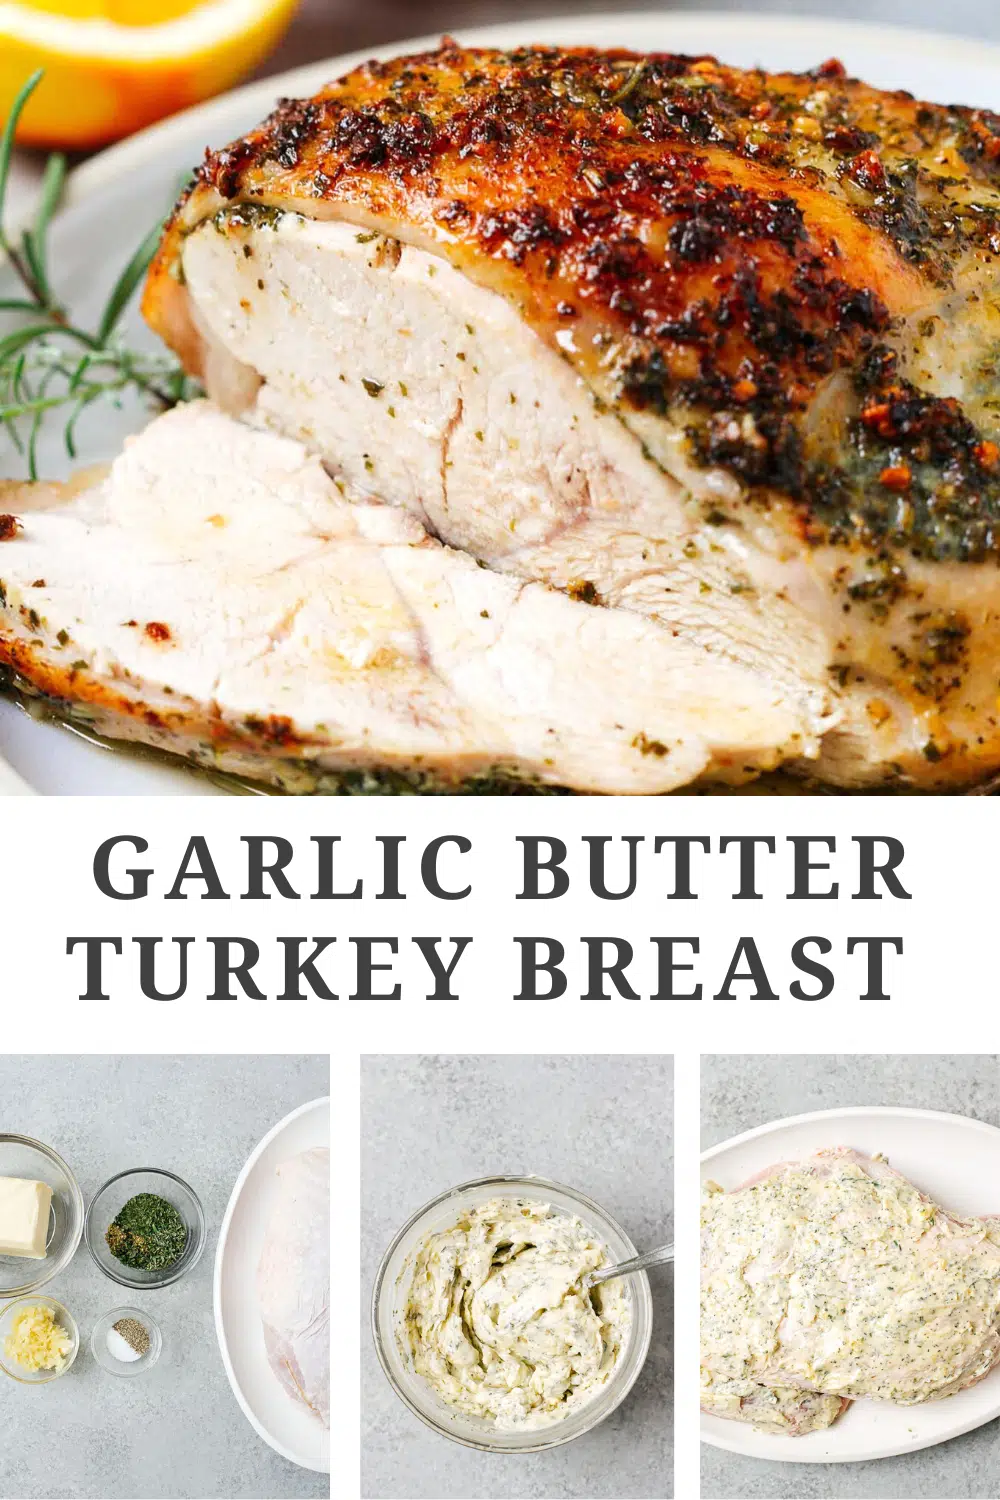 titled photo collage (and shown): Garlic Butter Turkey Breast